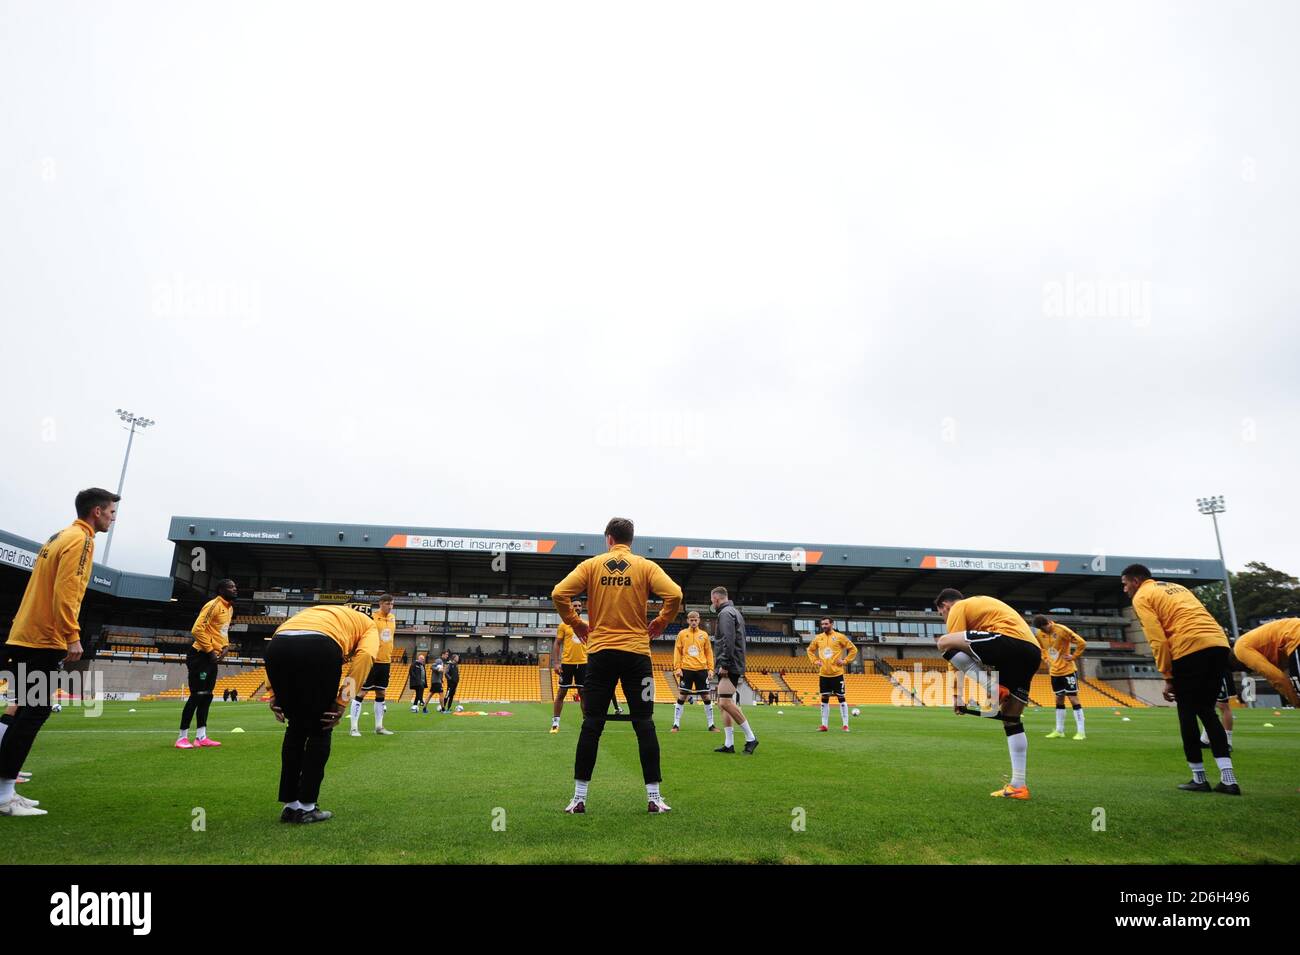 Port Vale players warm up before the Sky Bet League Two match at Vale Park, Stoke-on-Trent. Stock Photo